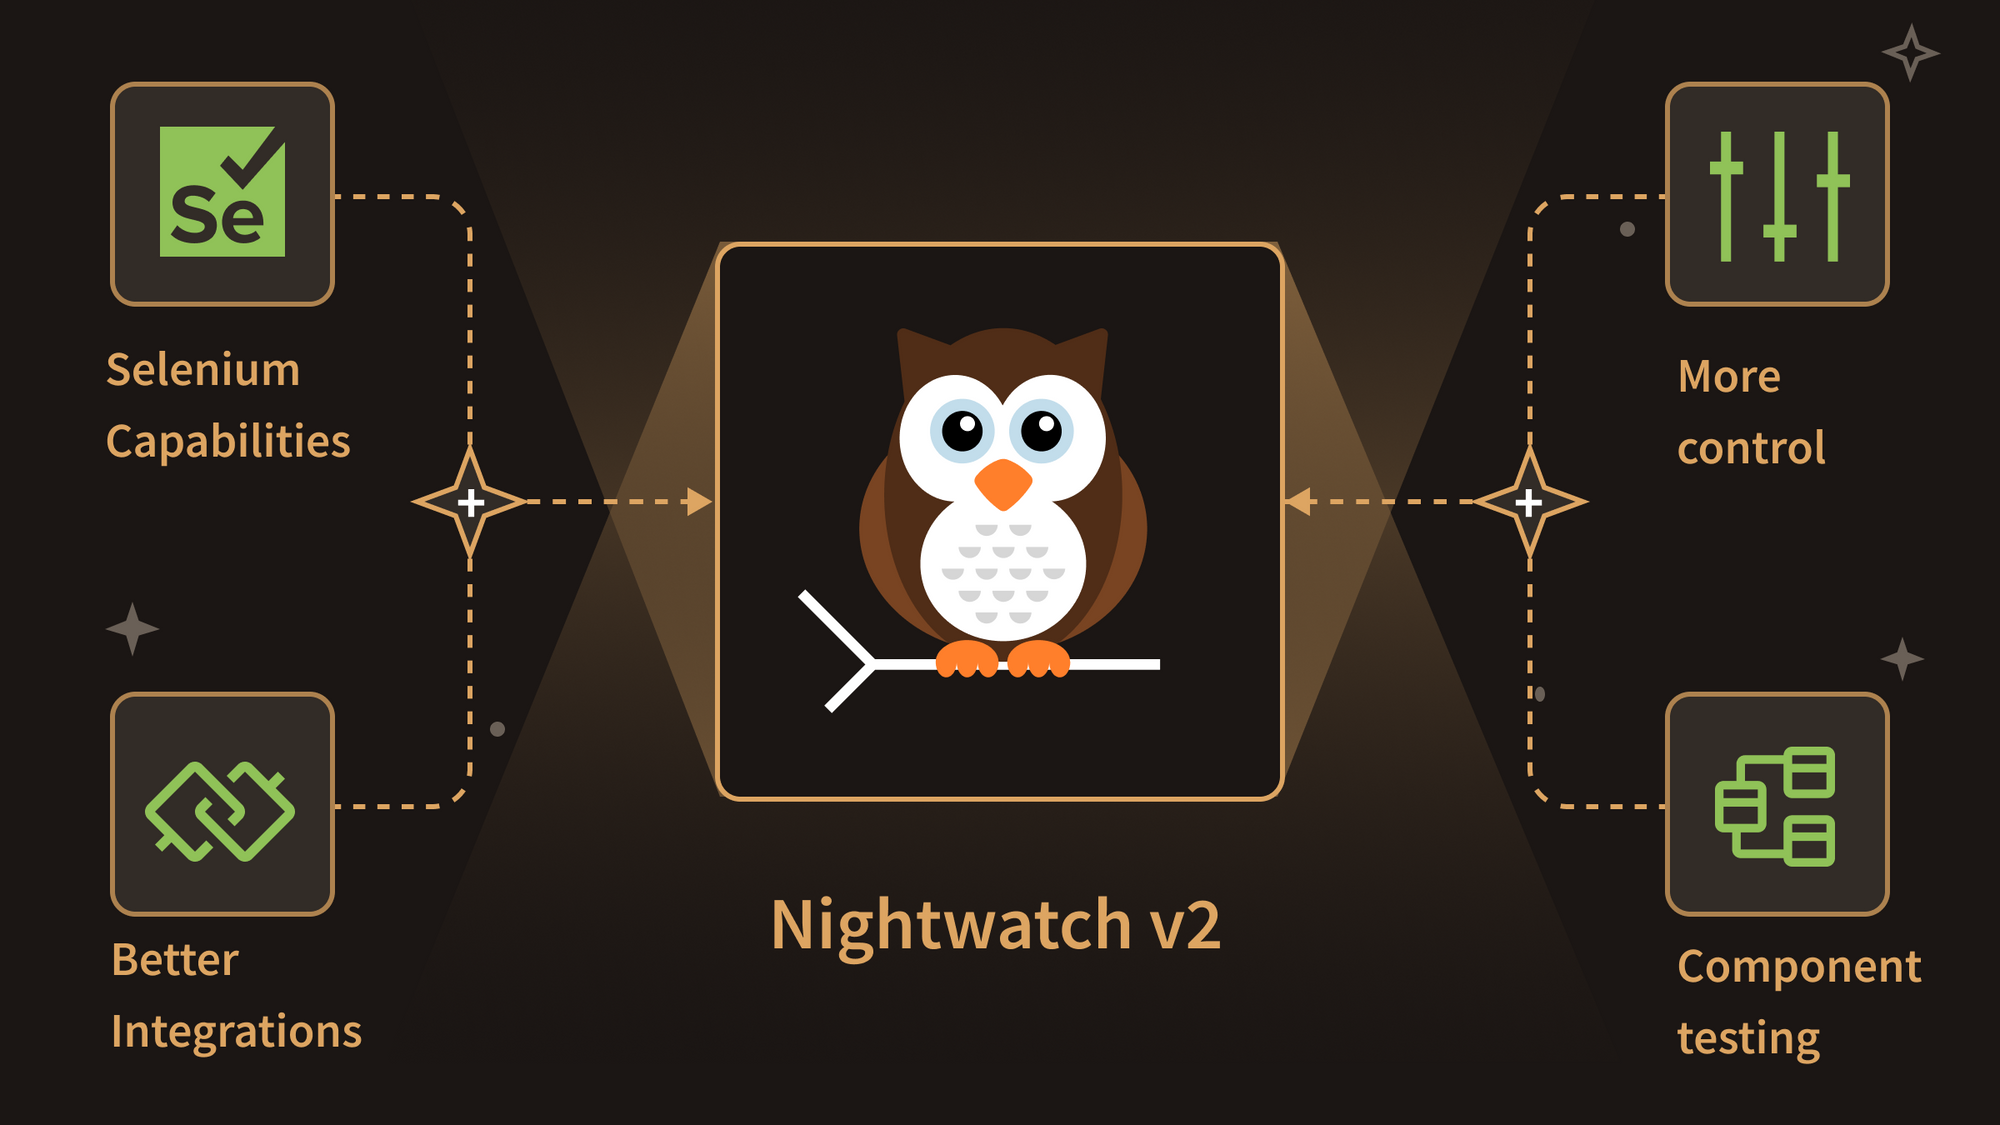 What's new in Nightwatch v2